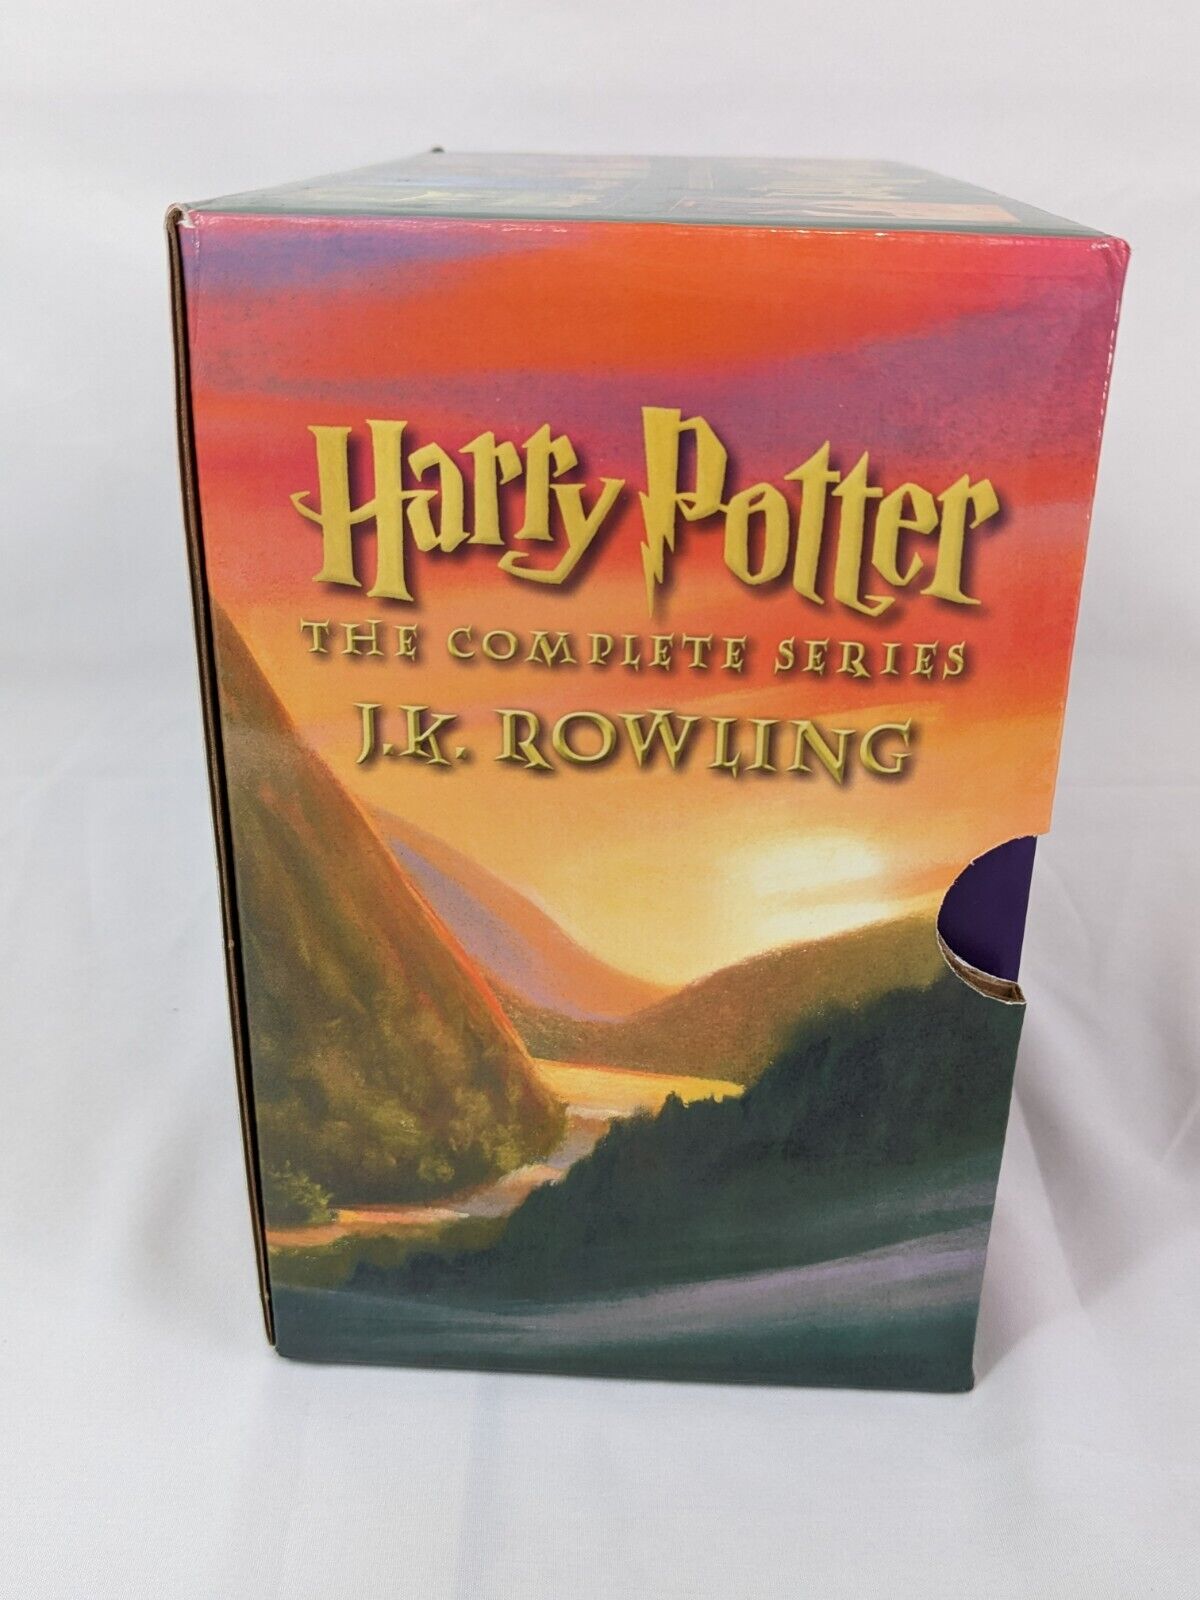 Scholastic Harry Potter The Complete Book Series by JK Rowling SET OF 7